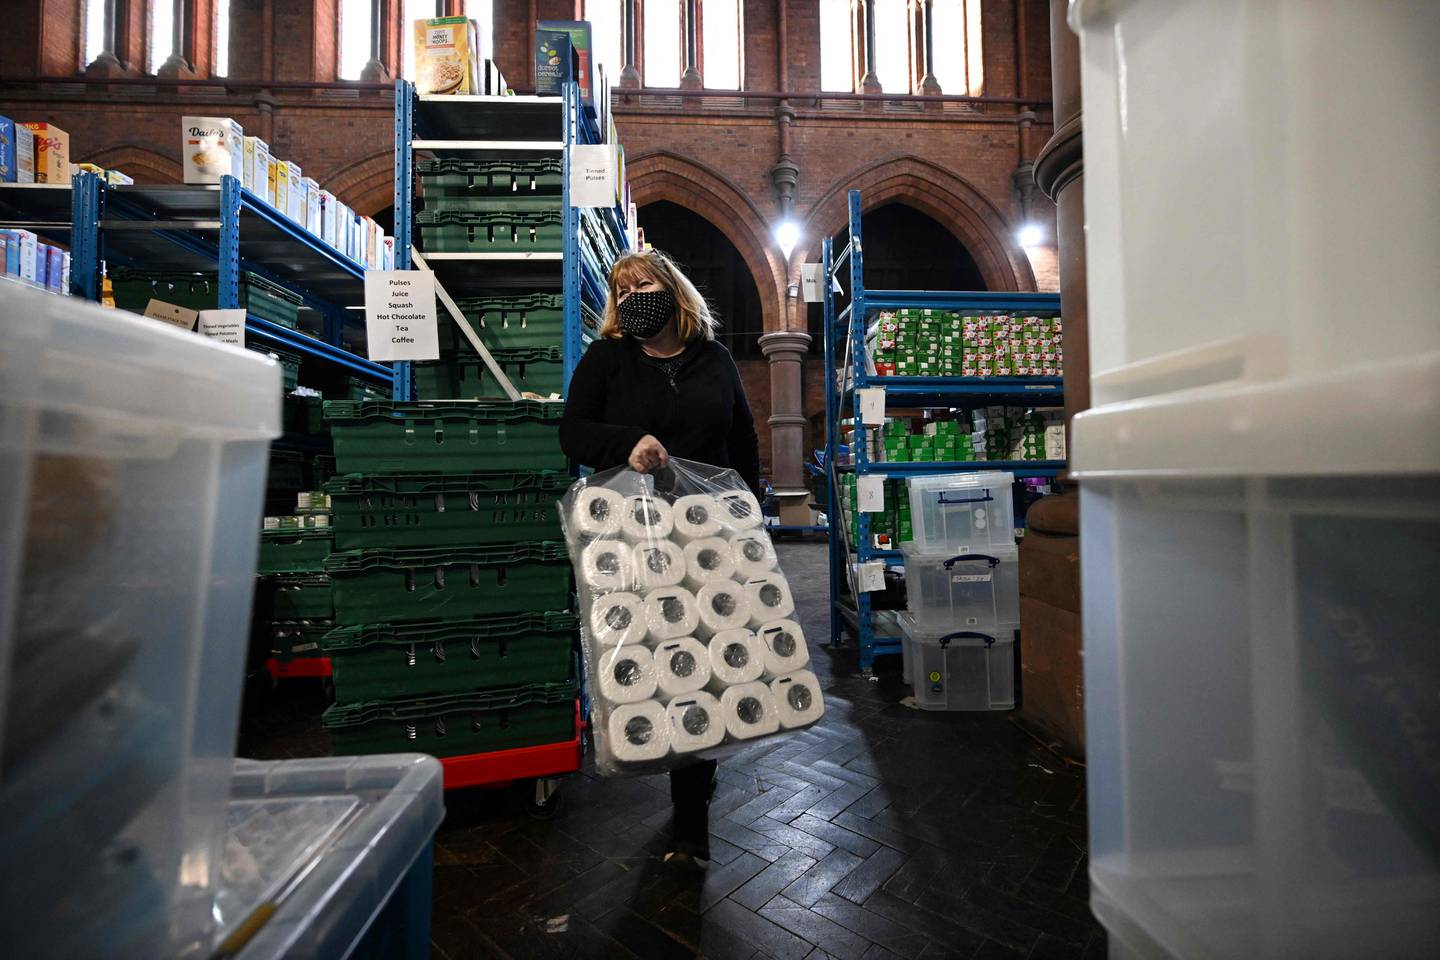 A volunteer stocks shelves with donated items at a food bank in Brixton, south London. Foodbank use is soaring in Britain. AFP